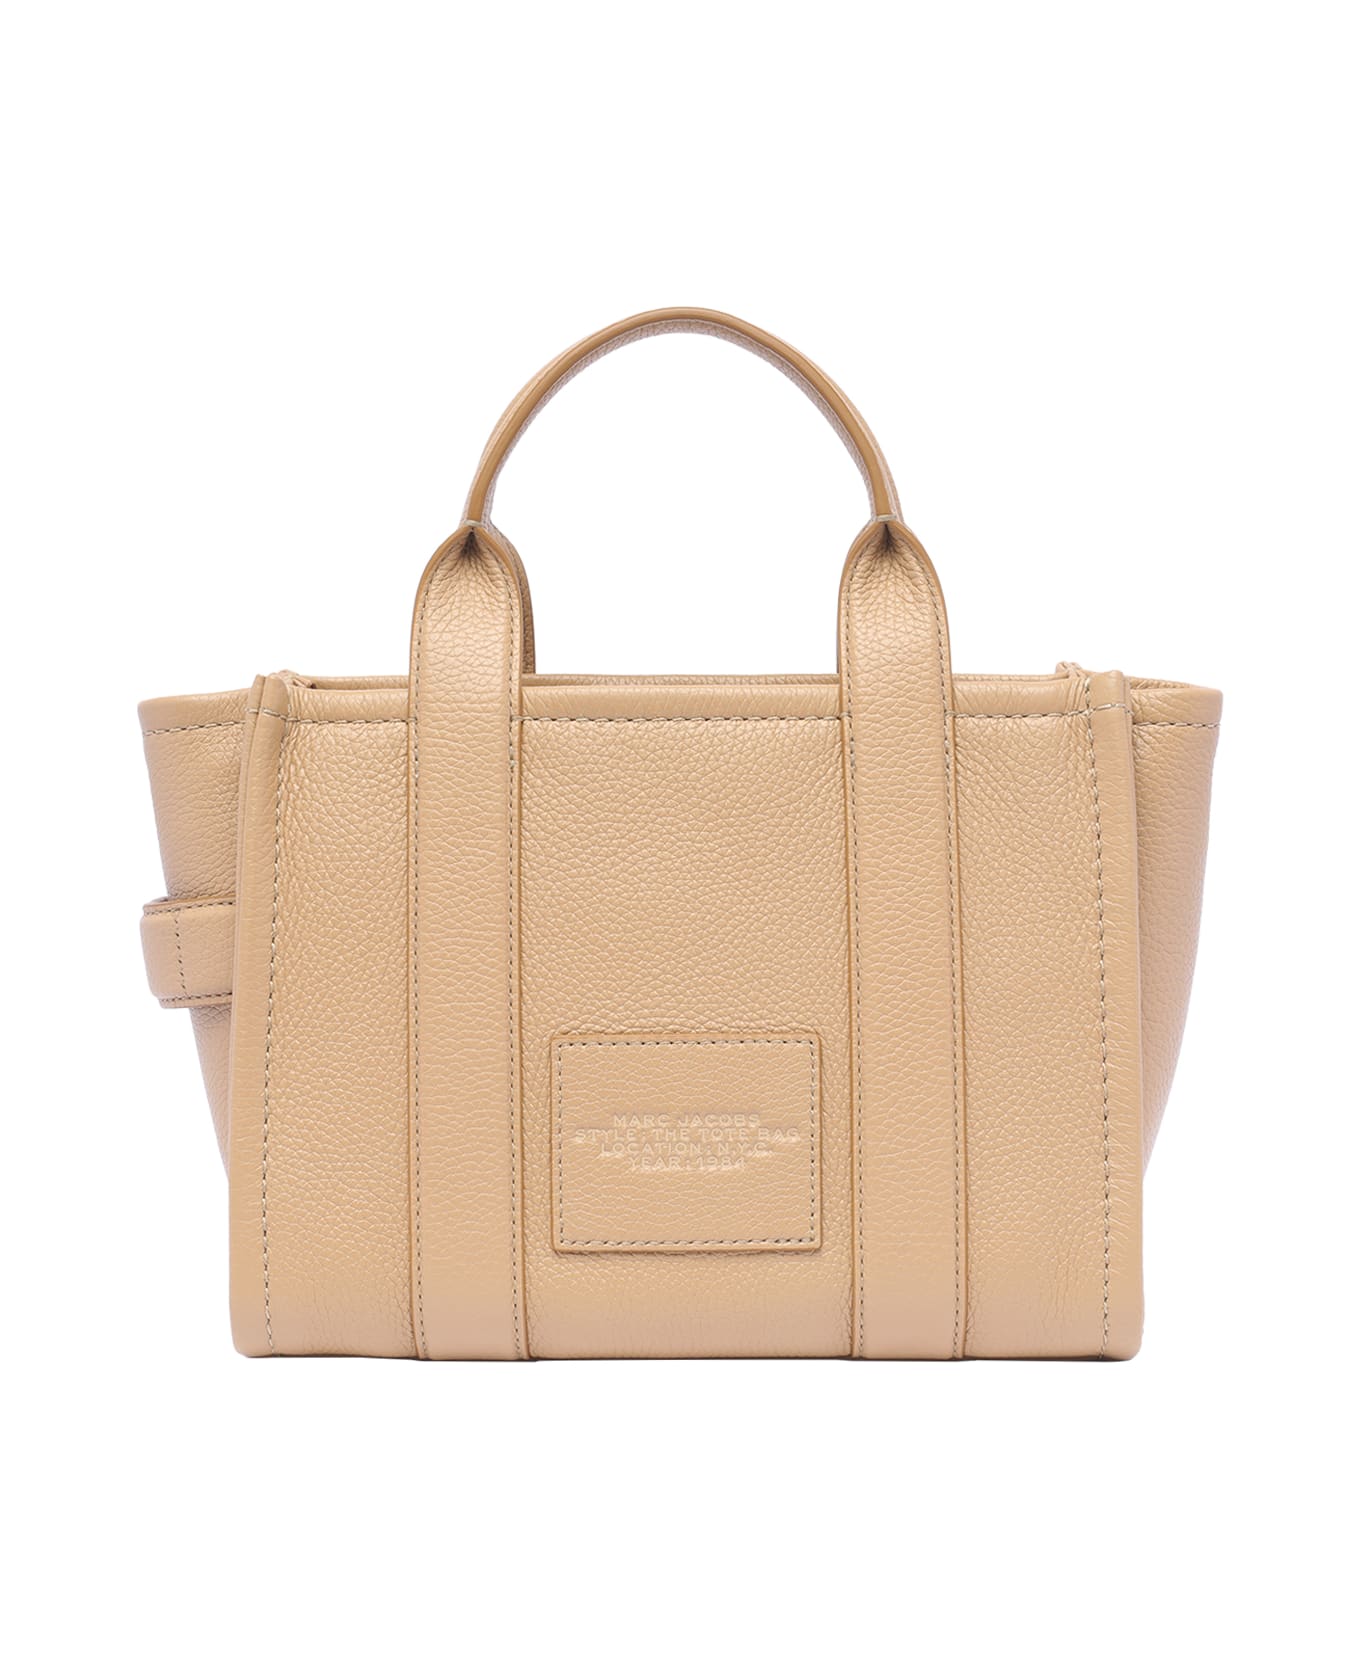 Marc Jacobs The Tote Bag - BROWN